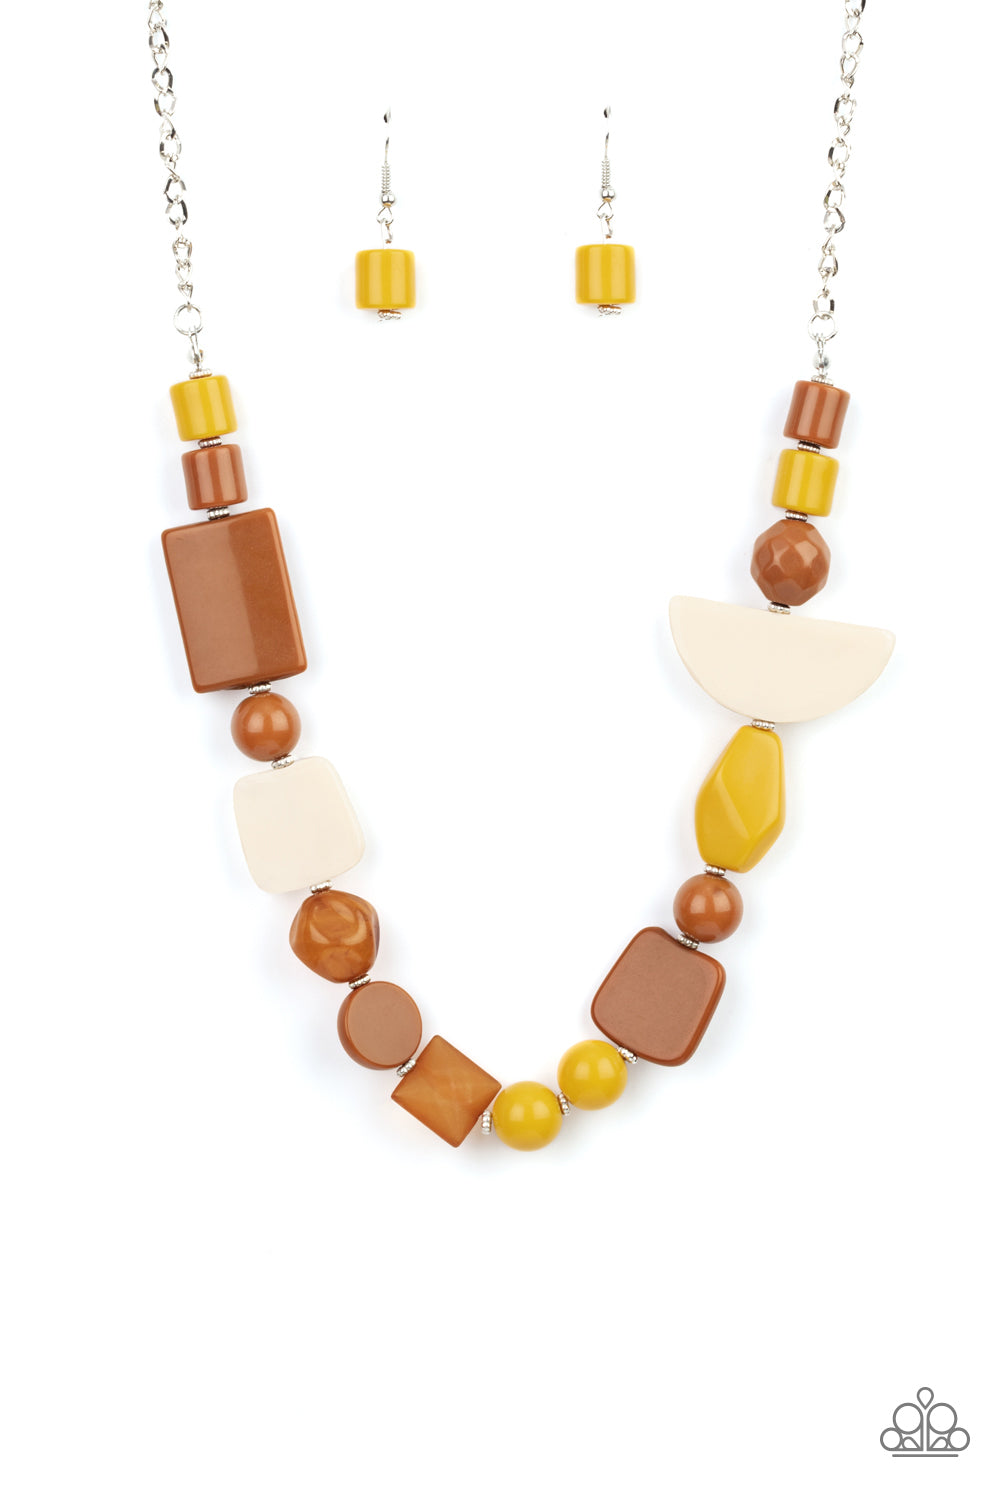 Featuring the rustic hues of Adobe, Mustard, and Soybean, mismatched acrylic and faux rock beads are haphazardly threaded along an invisible wire below the collar for an abstract artisan vibe. Features an adjustable clasp closure.